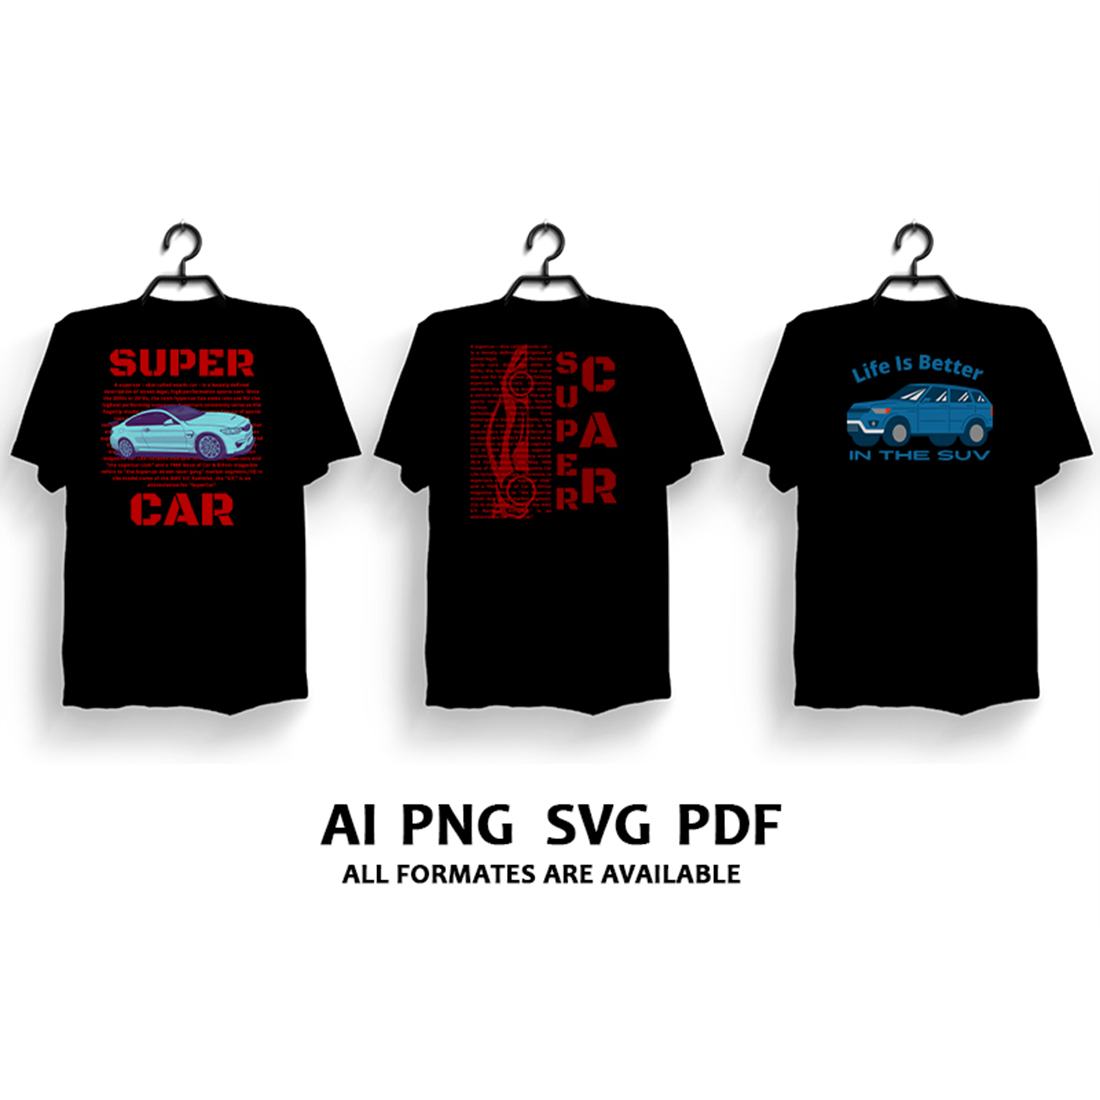 Collection of images of t-shirts with exquisite prints with cars